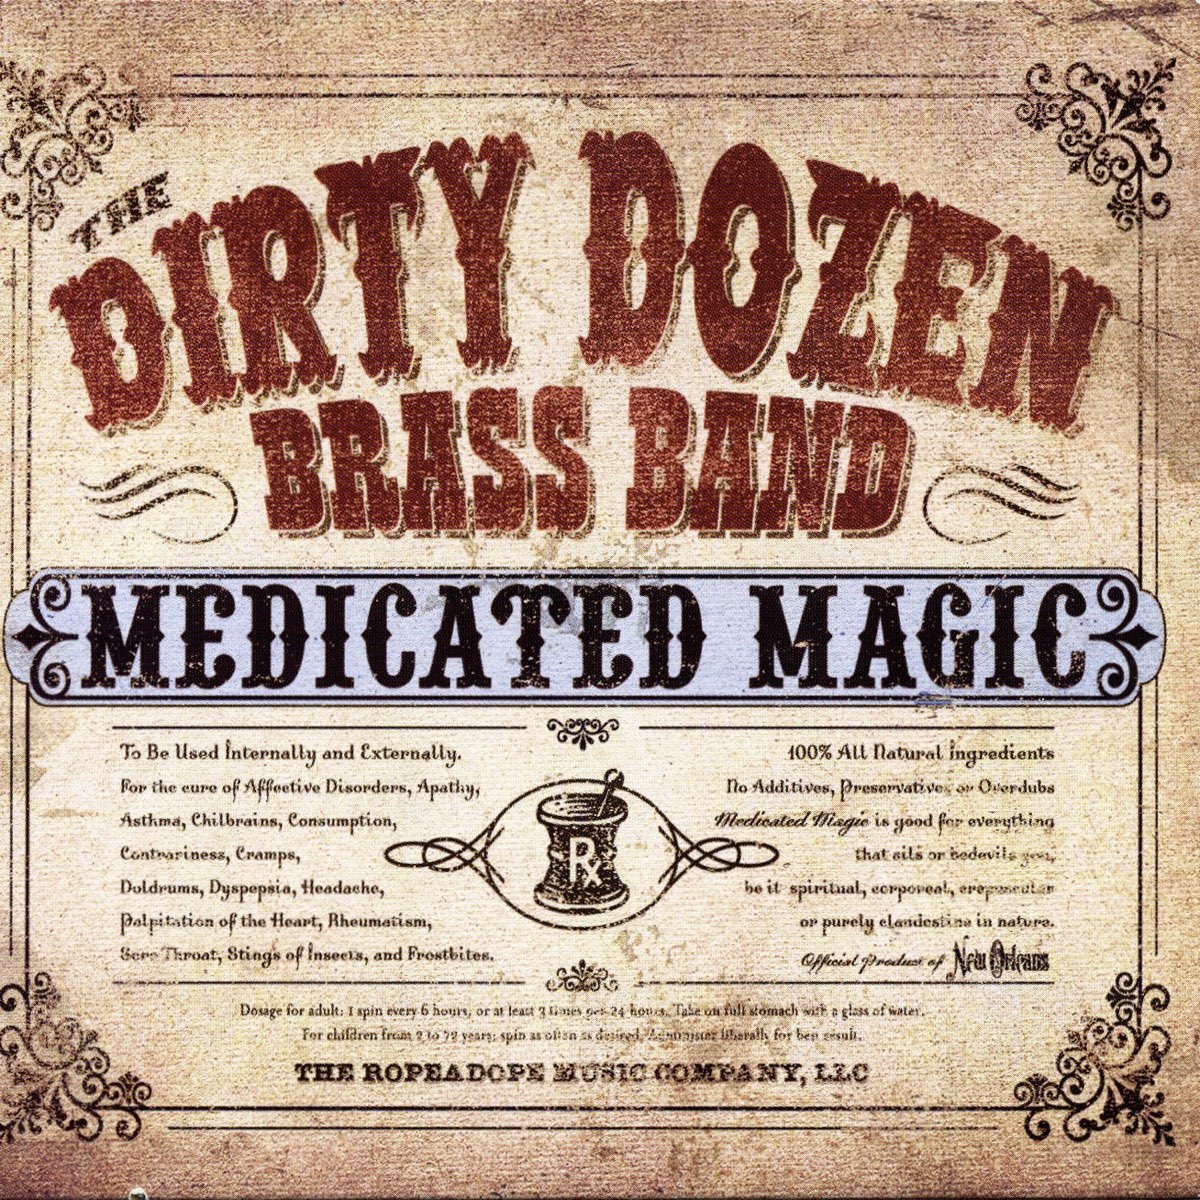 Classic Album Review: The Dirty Dozen Brass Band